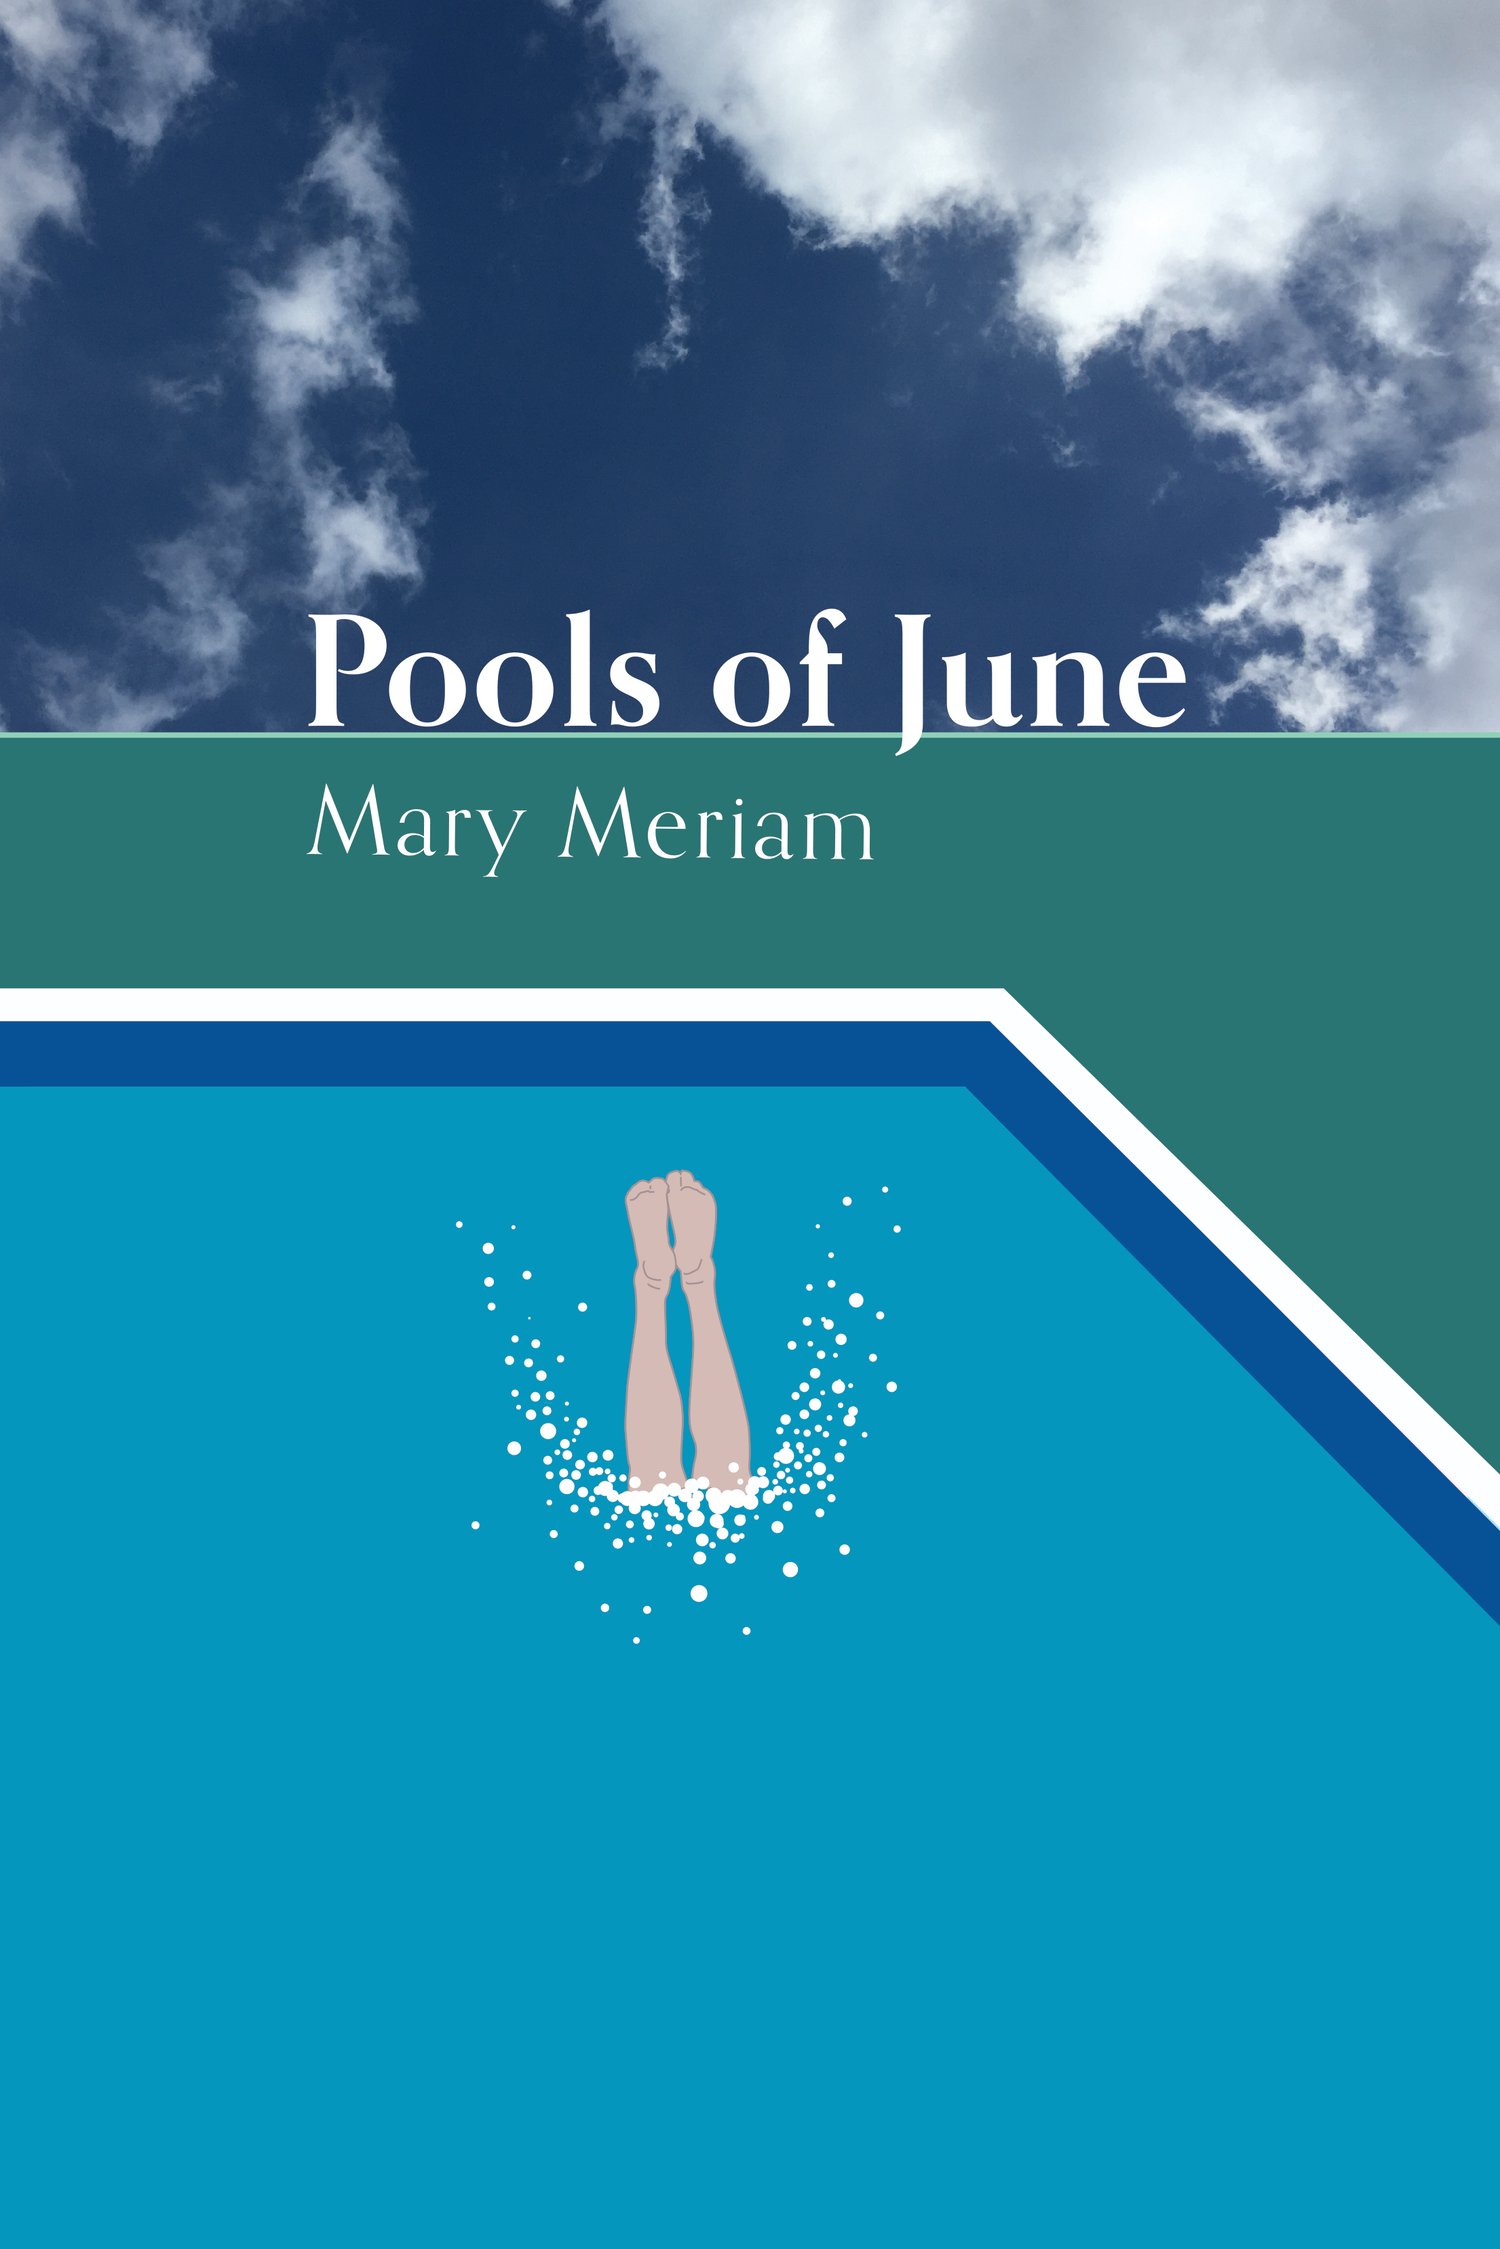 POOLS OF JUNE by Mary Meriam